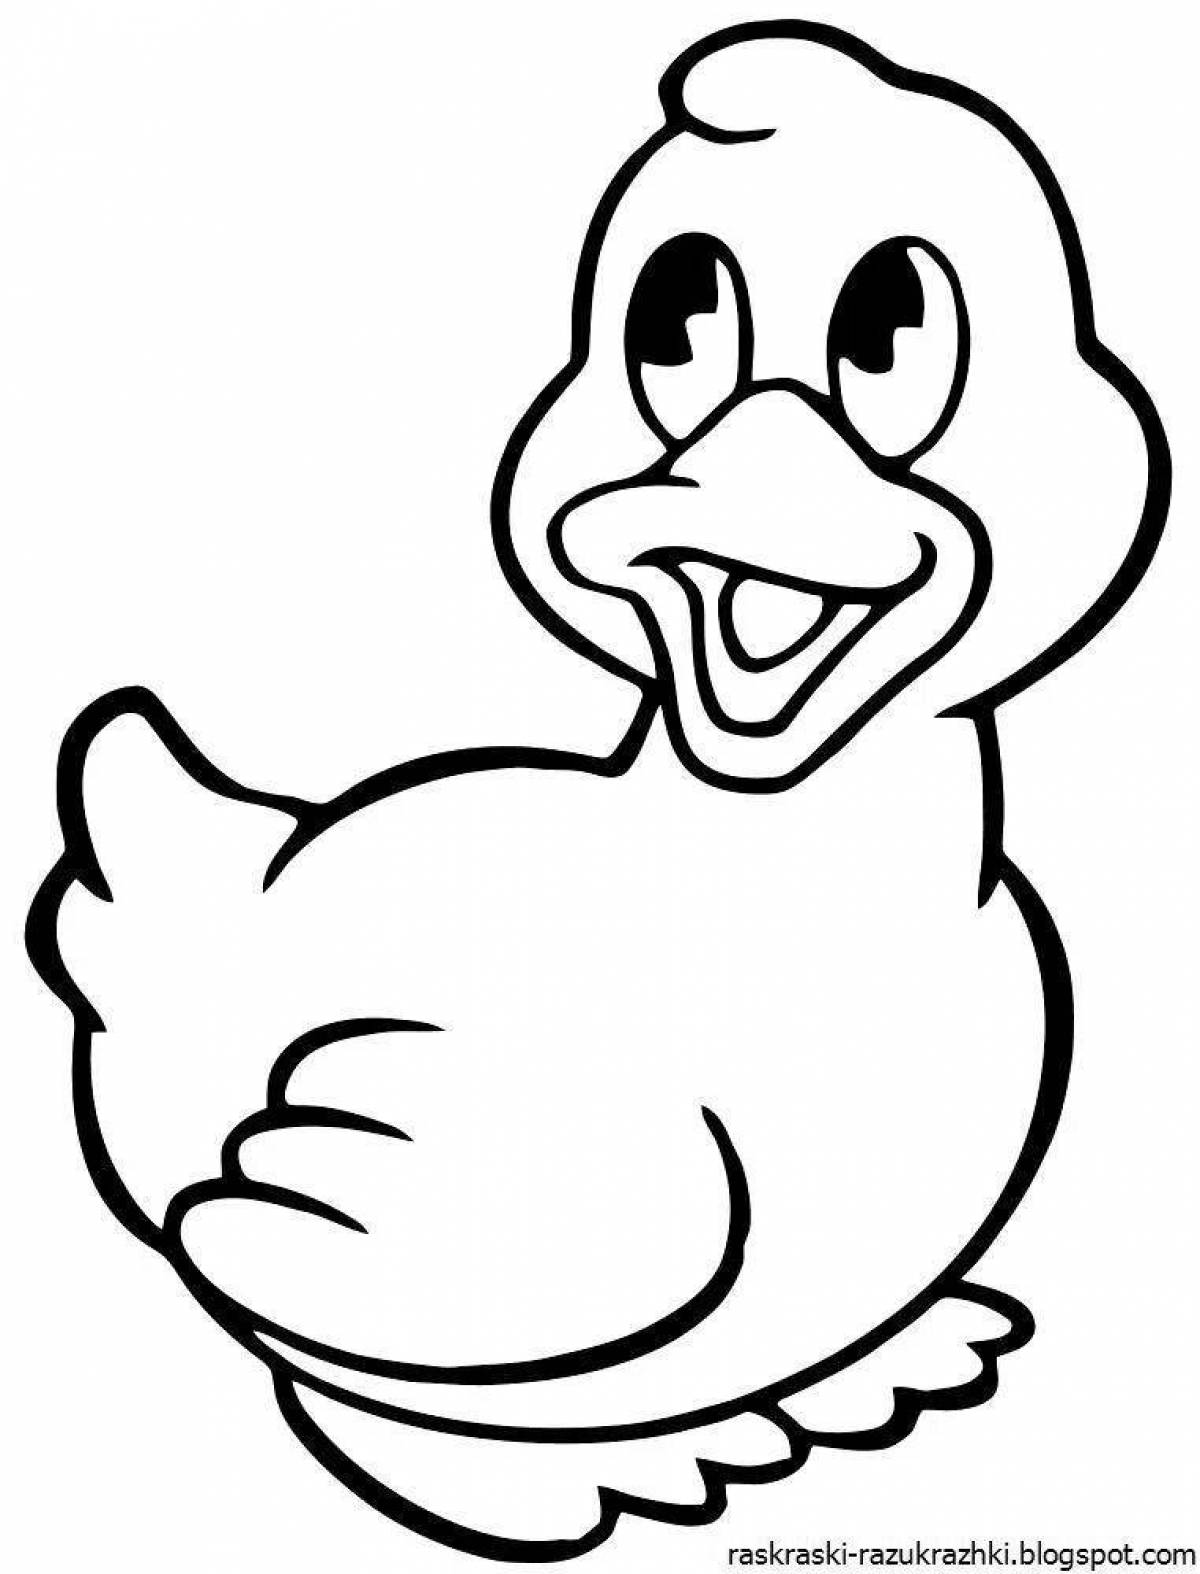 Animated duck coloring page for kids